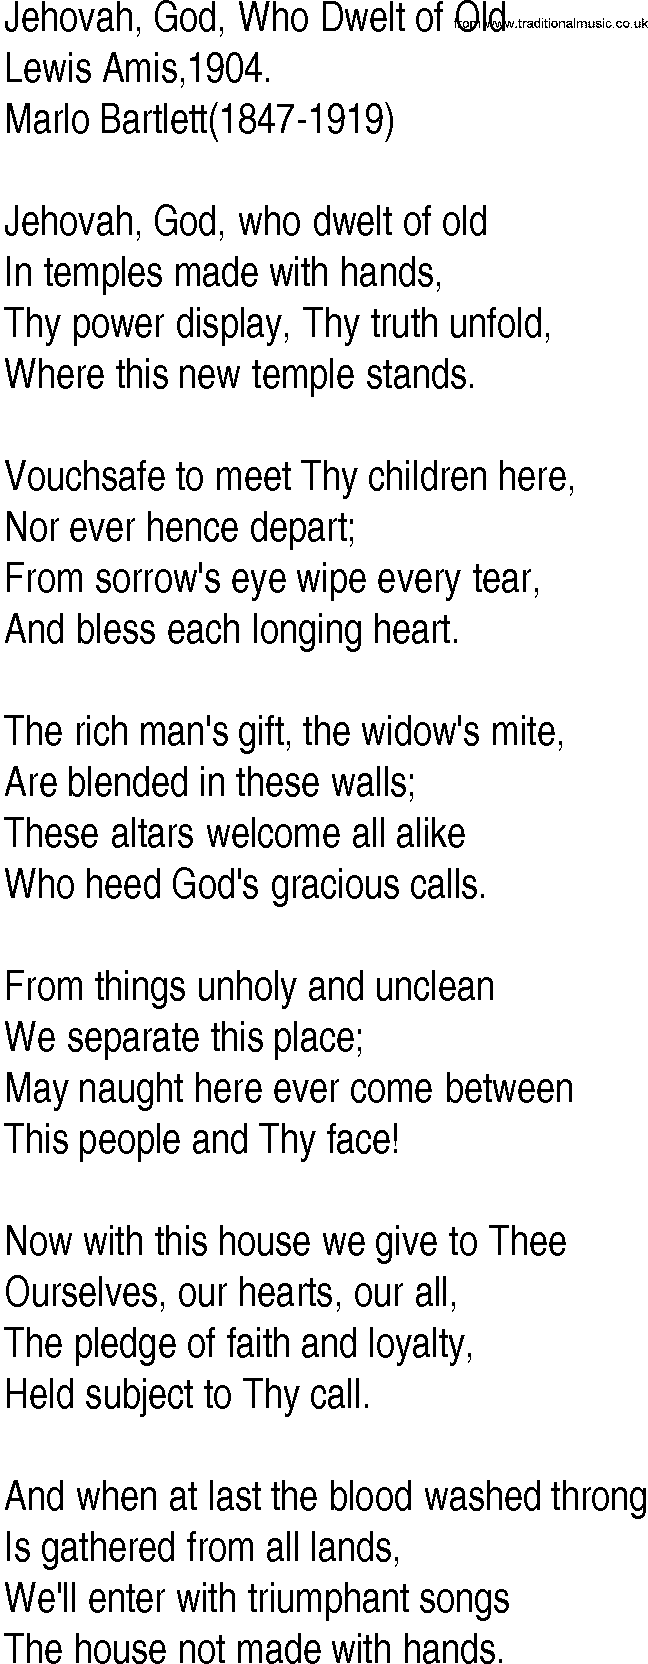 Hymn and Gospel Song: Jehovah, God, Who Dwelt of Old by Lewis Amis lyrics